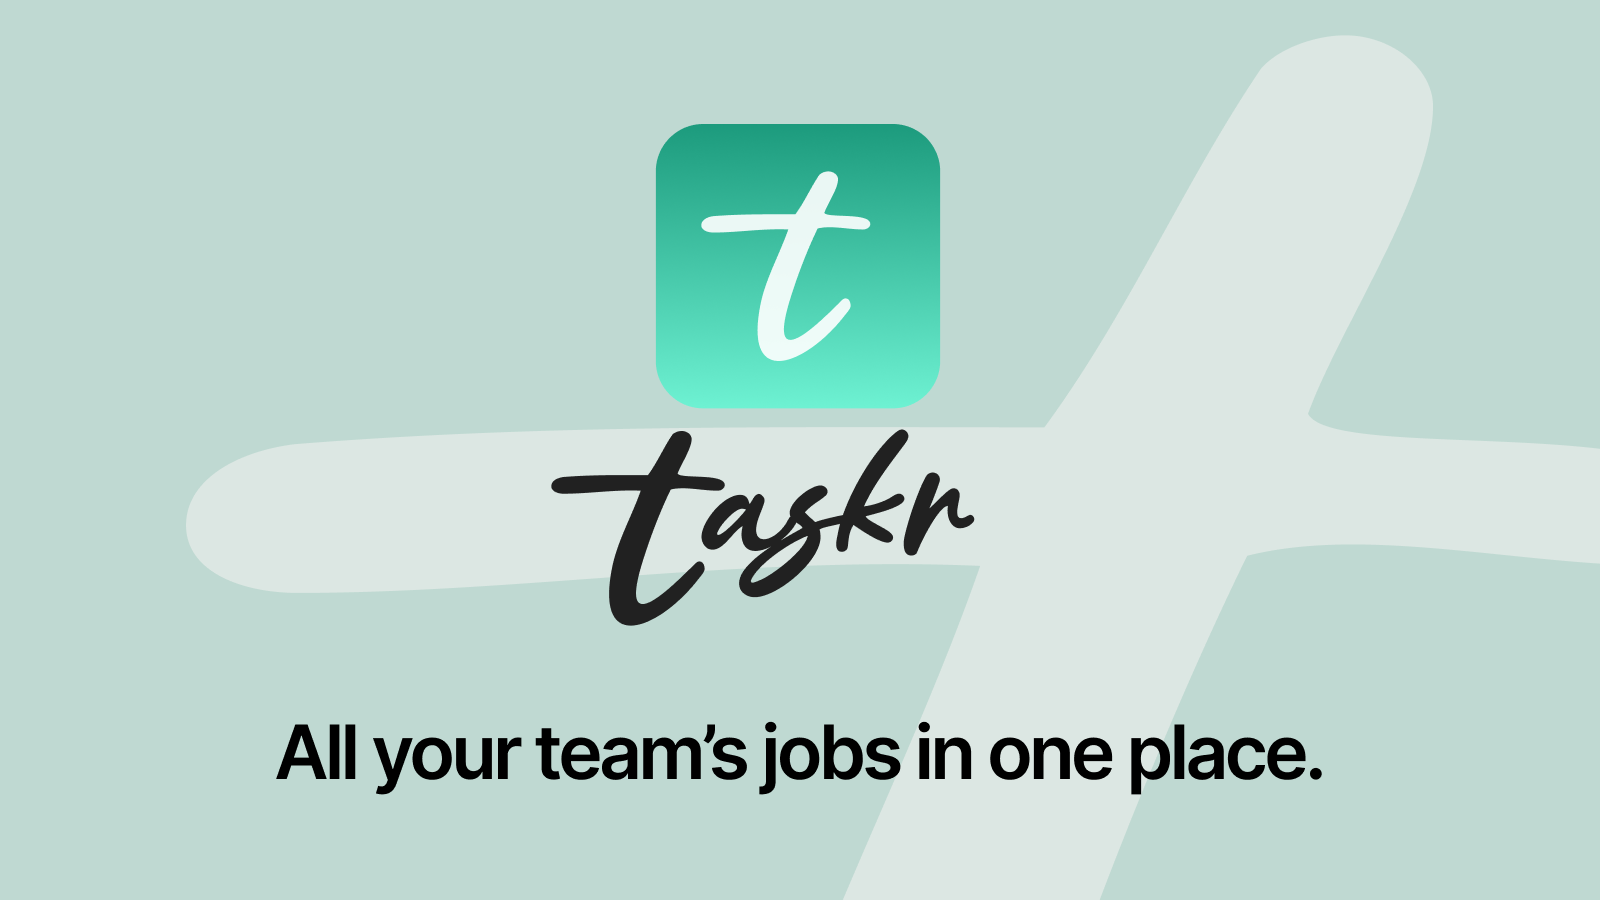 Taskr: All your team's jobs in one place.